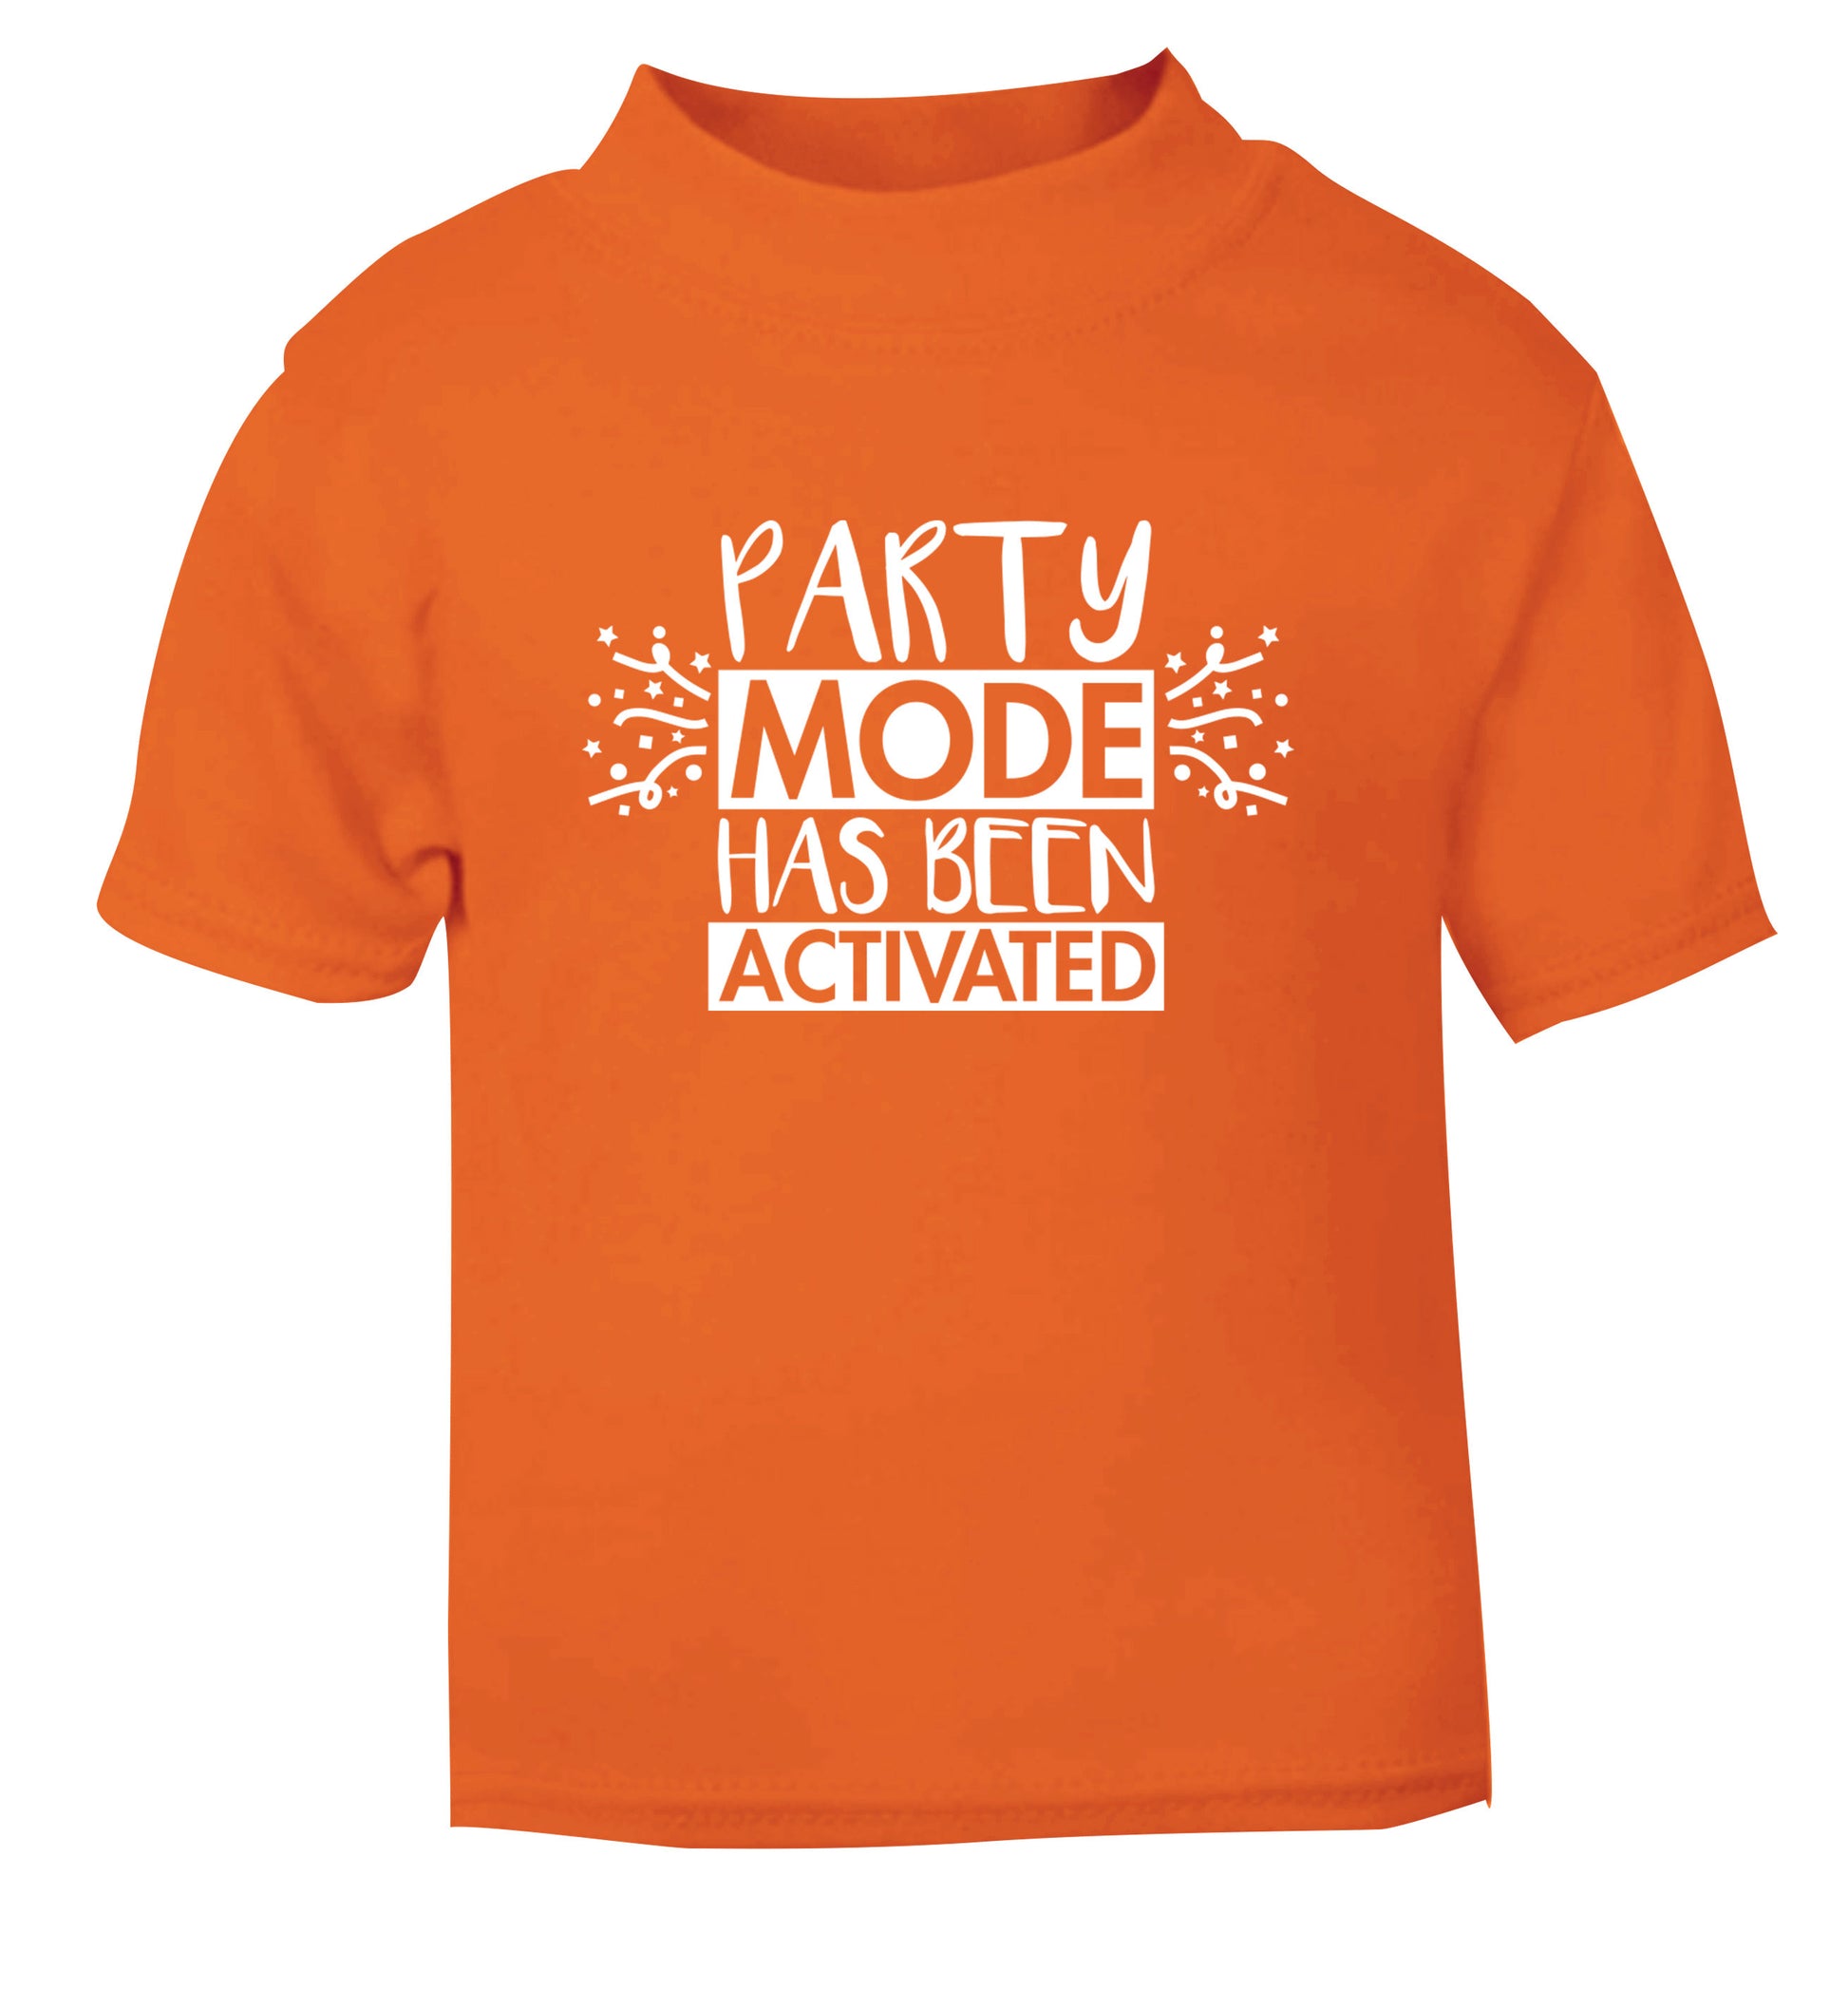 Please do not disturb party mode has been activated orange Baby Toddler Tshirt 2 Years